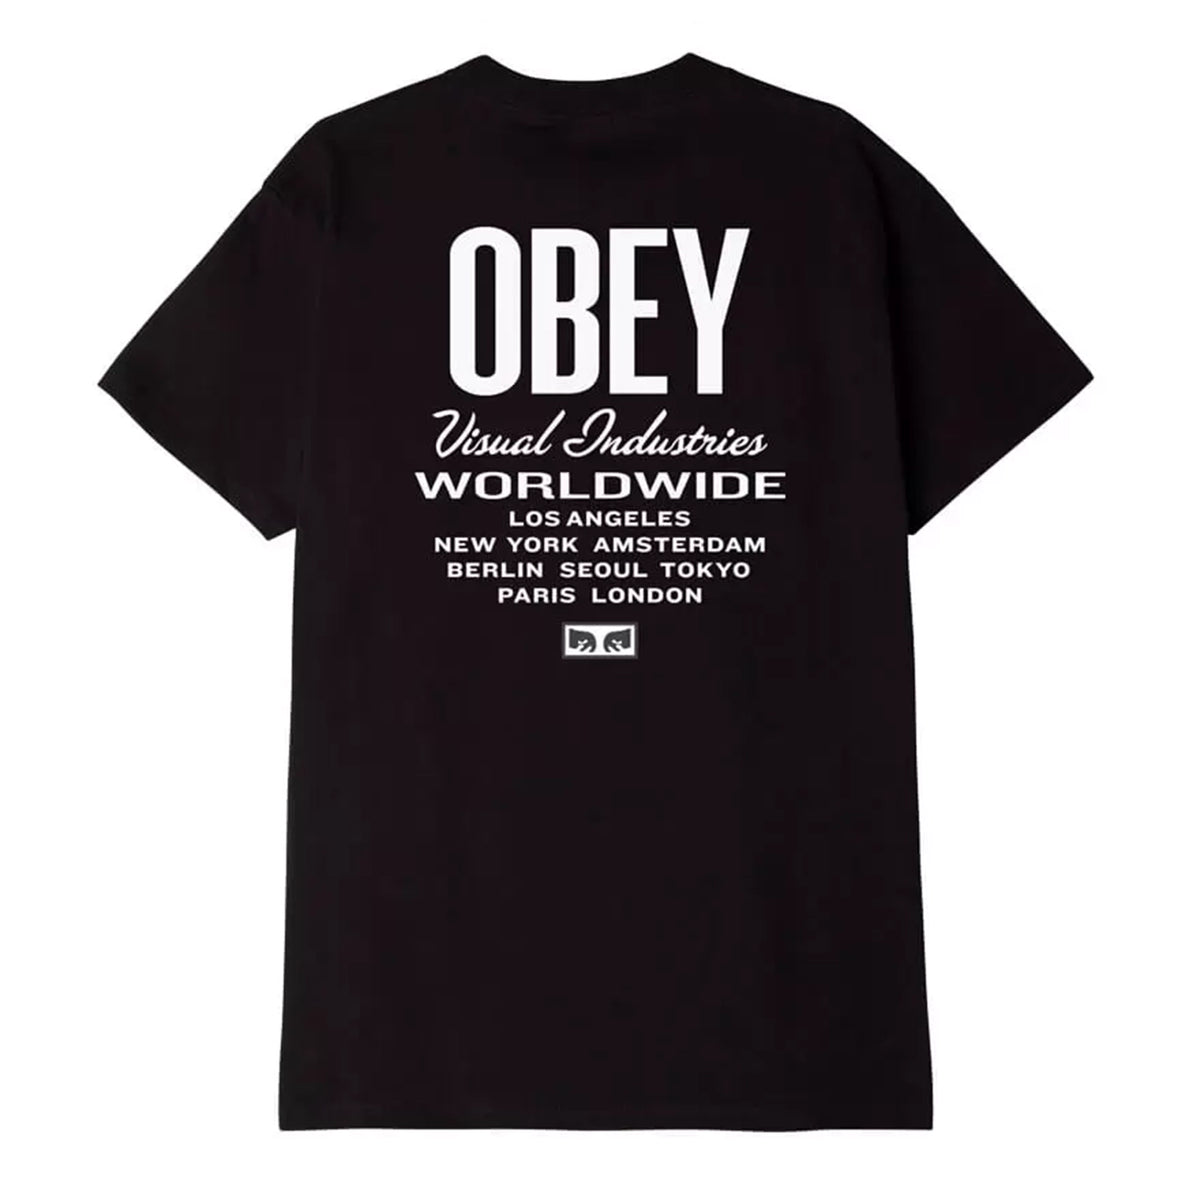 OBEY VISUAL IND WORLDWIDE